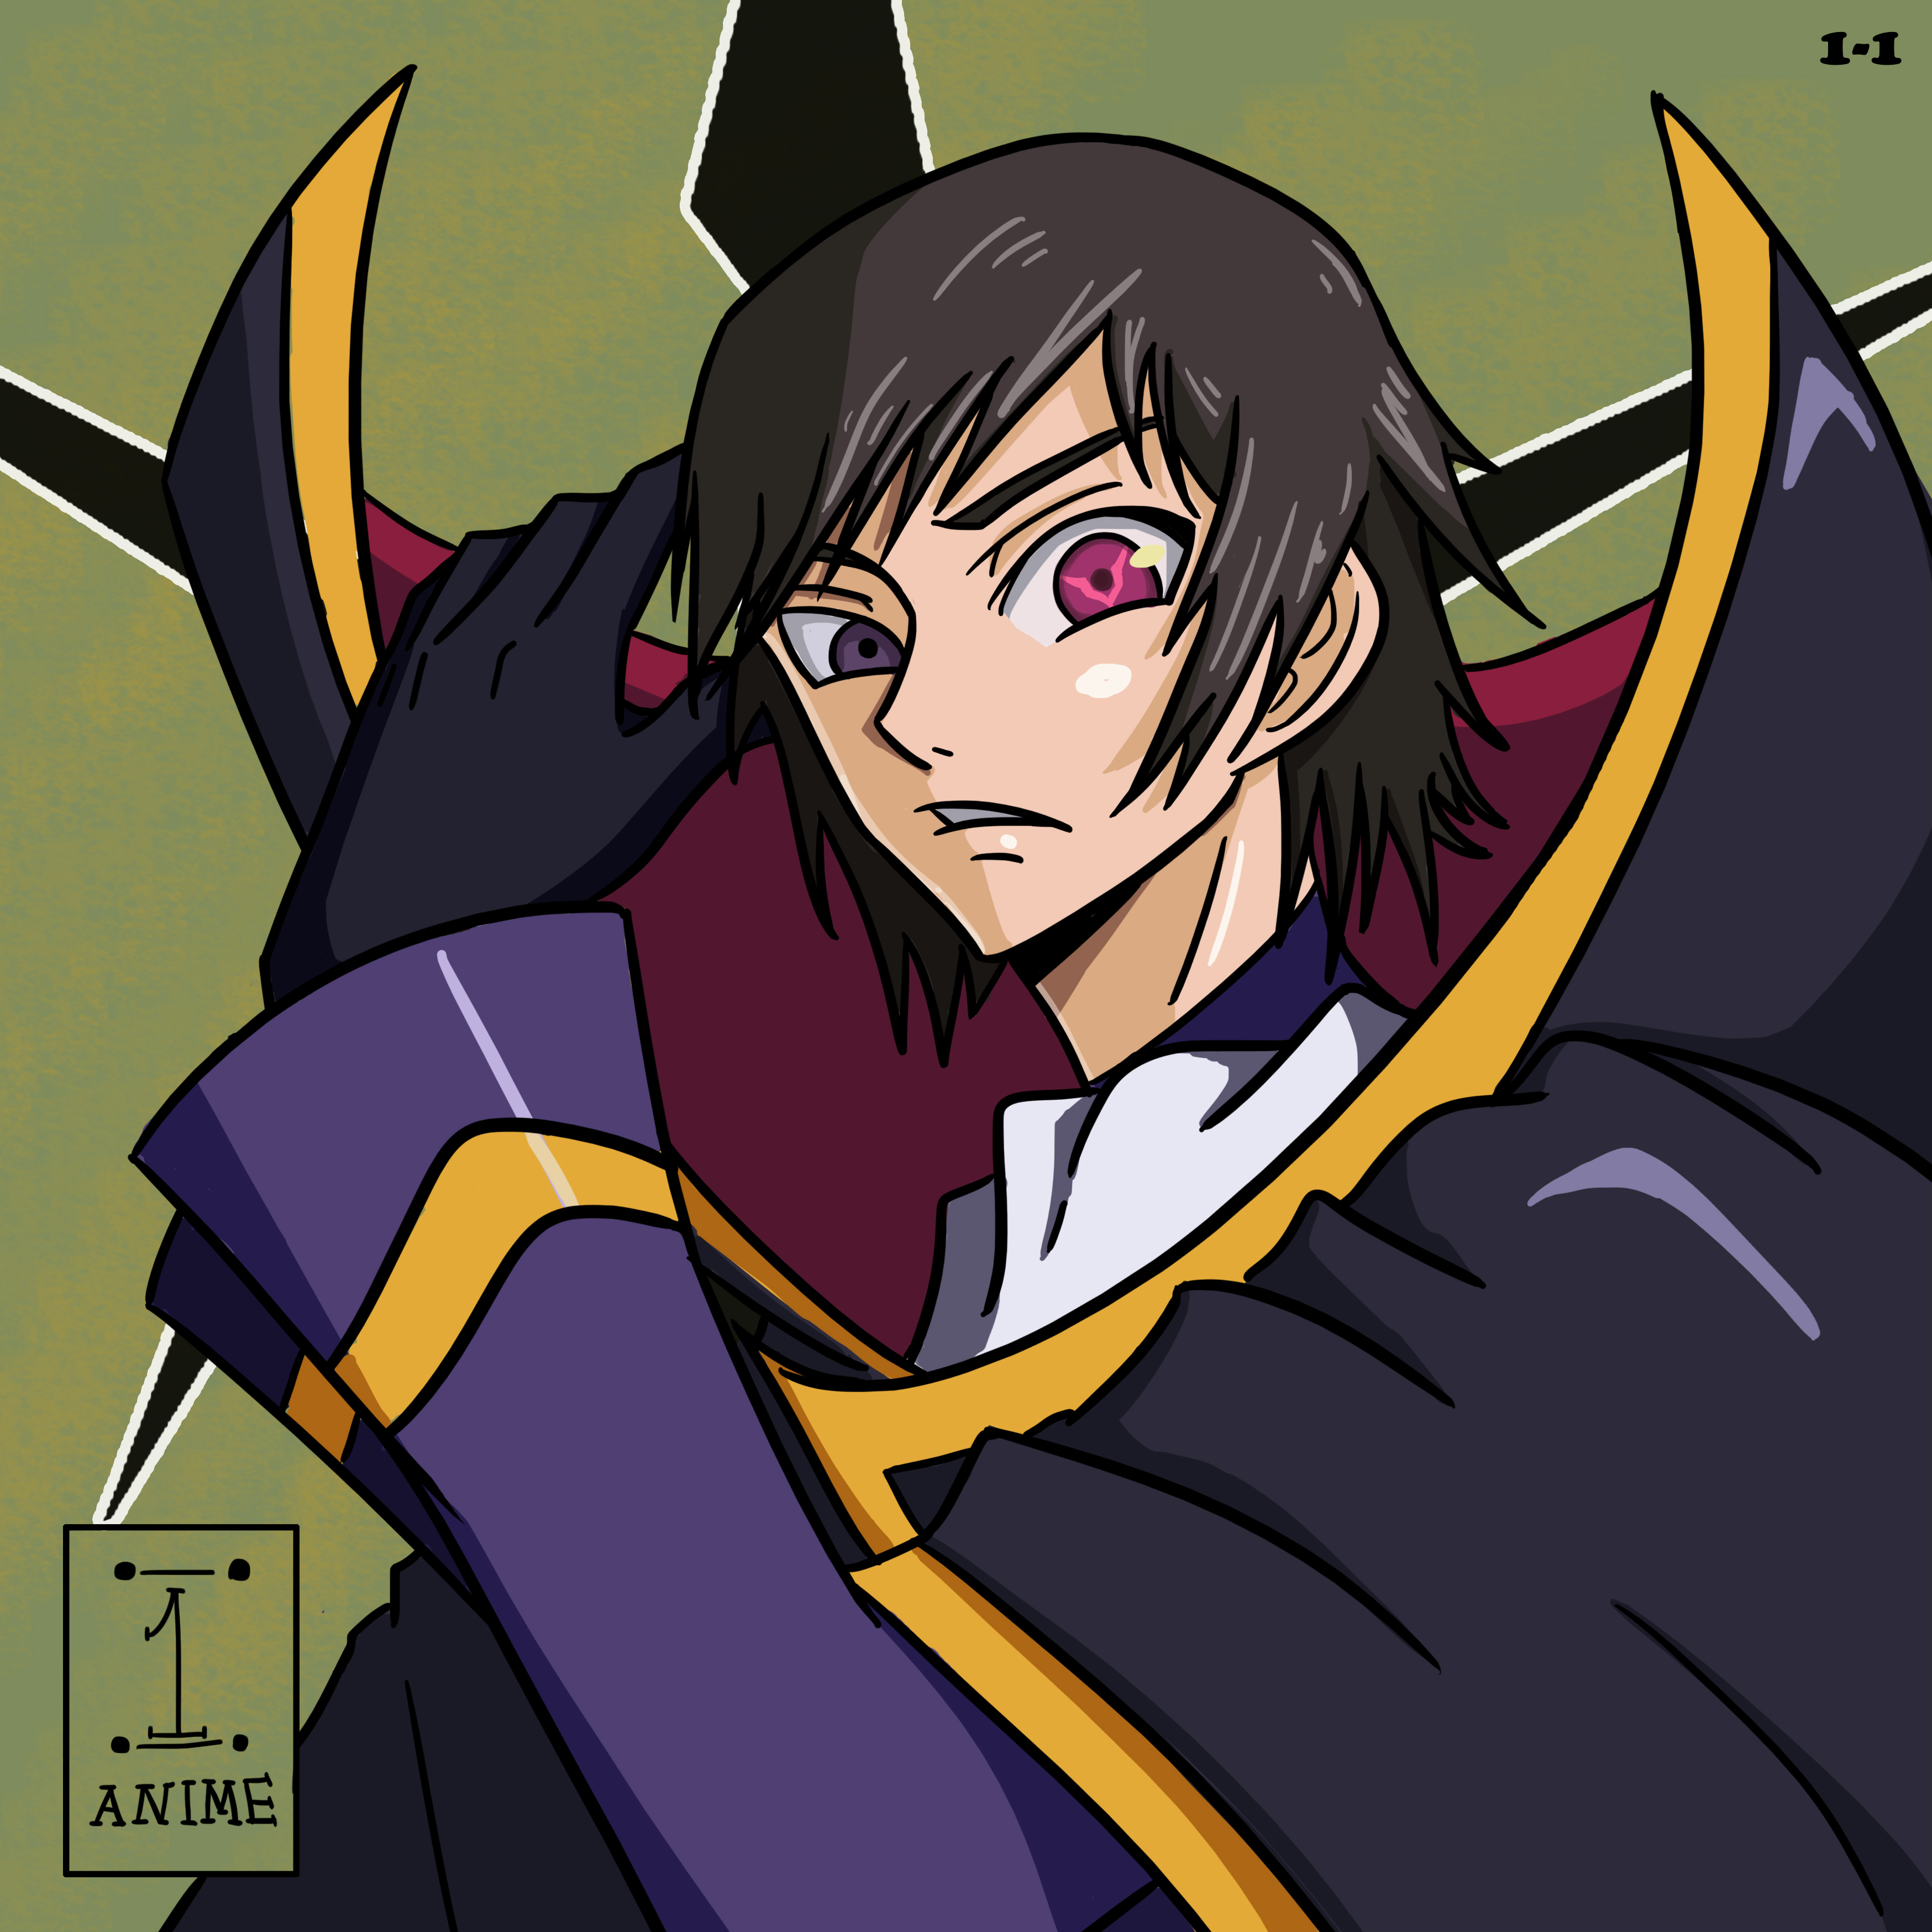 Weeb 007 - Lelouch vi Britannia - Code Geass - WeebCollection